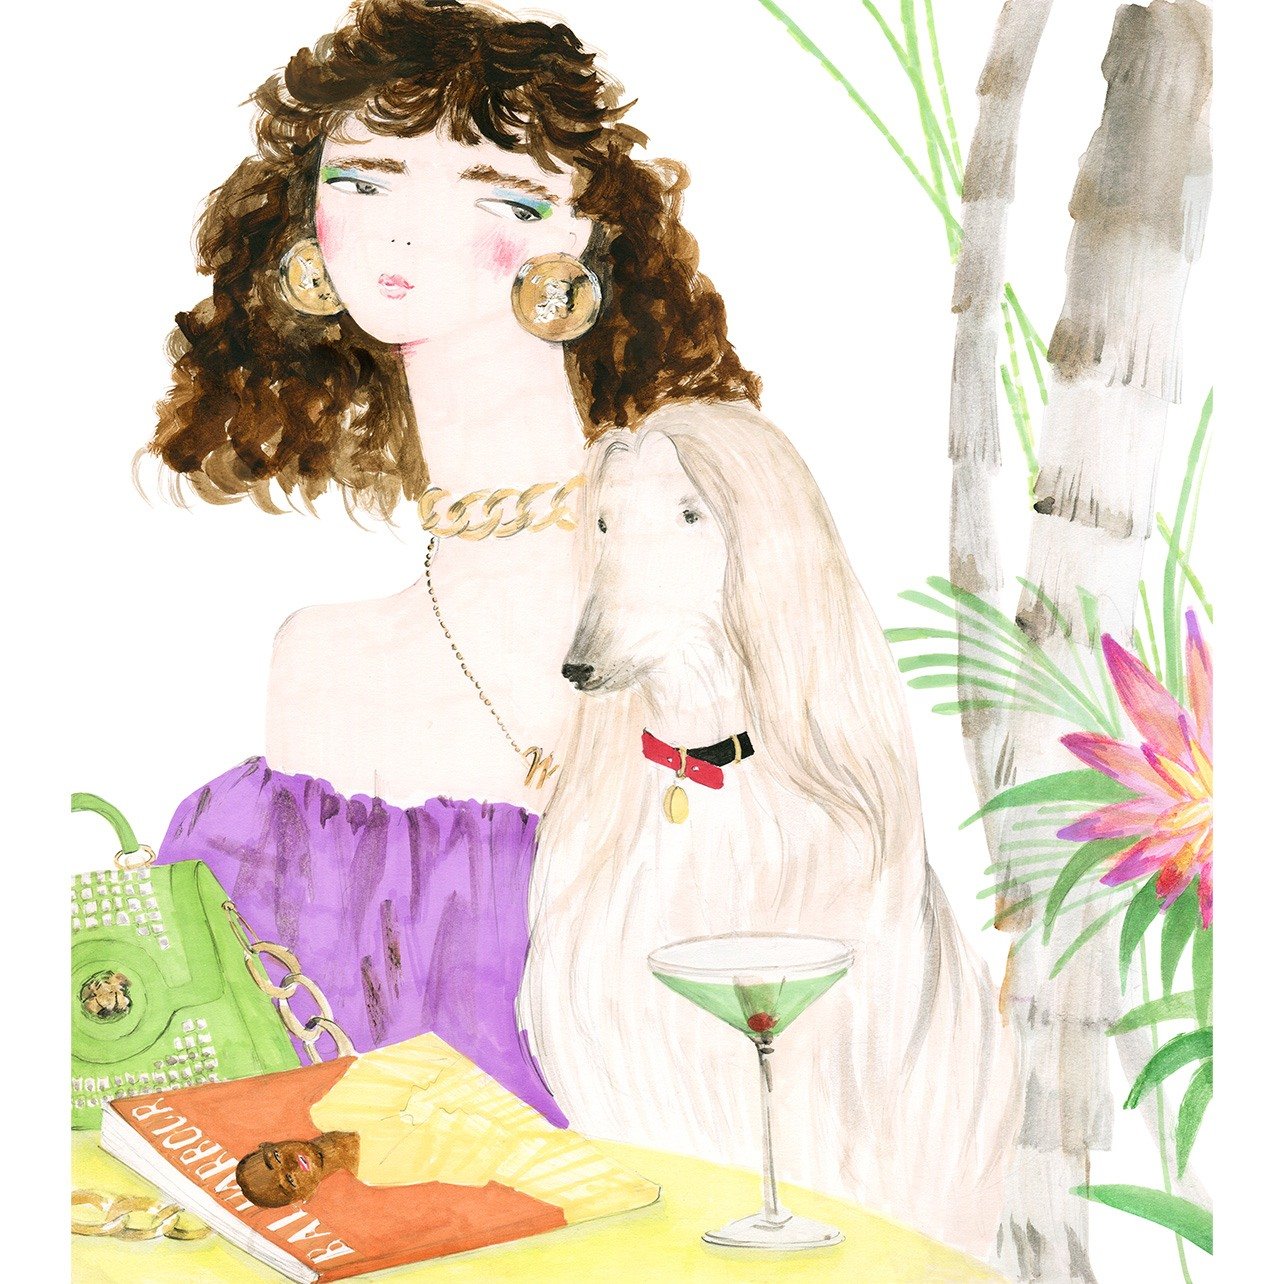 Illustration of a woman sitting with a long-haired dog